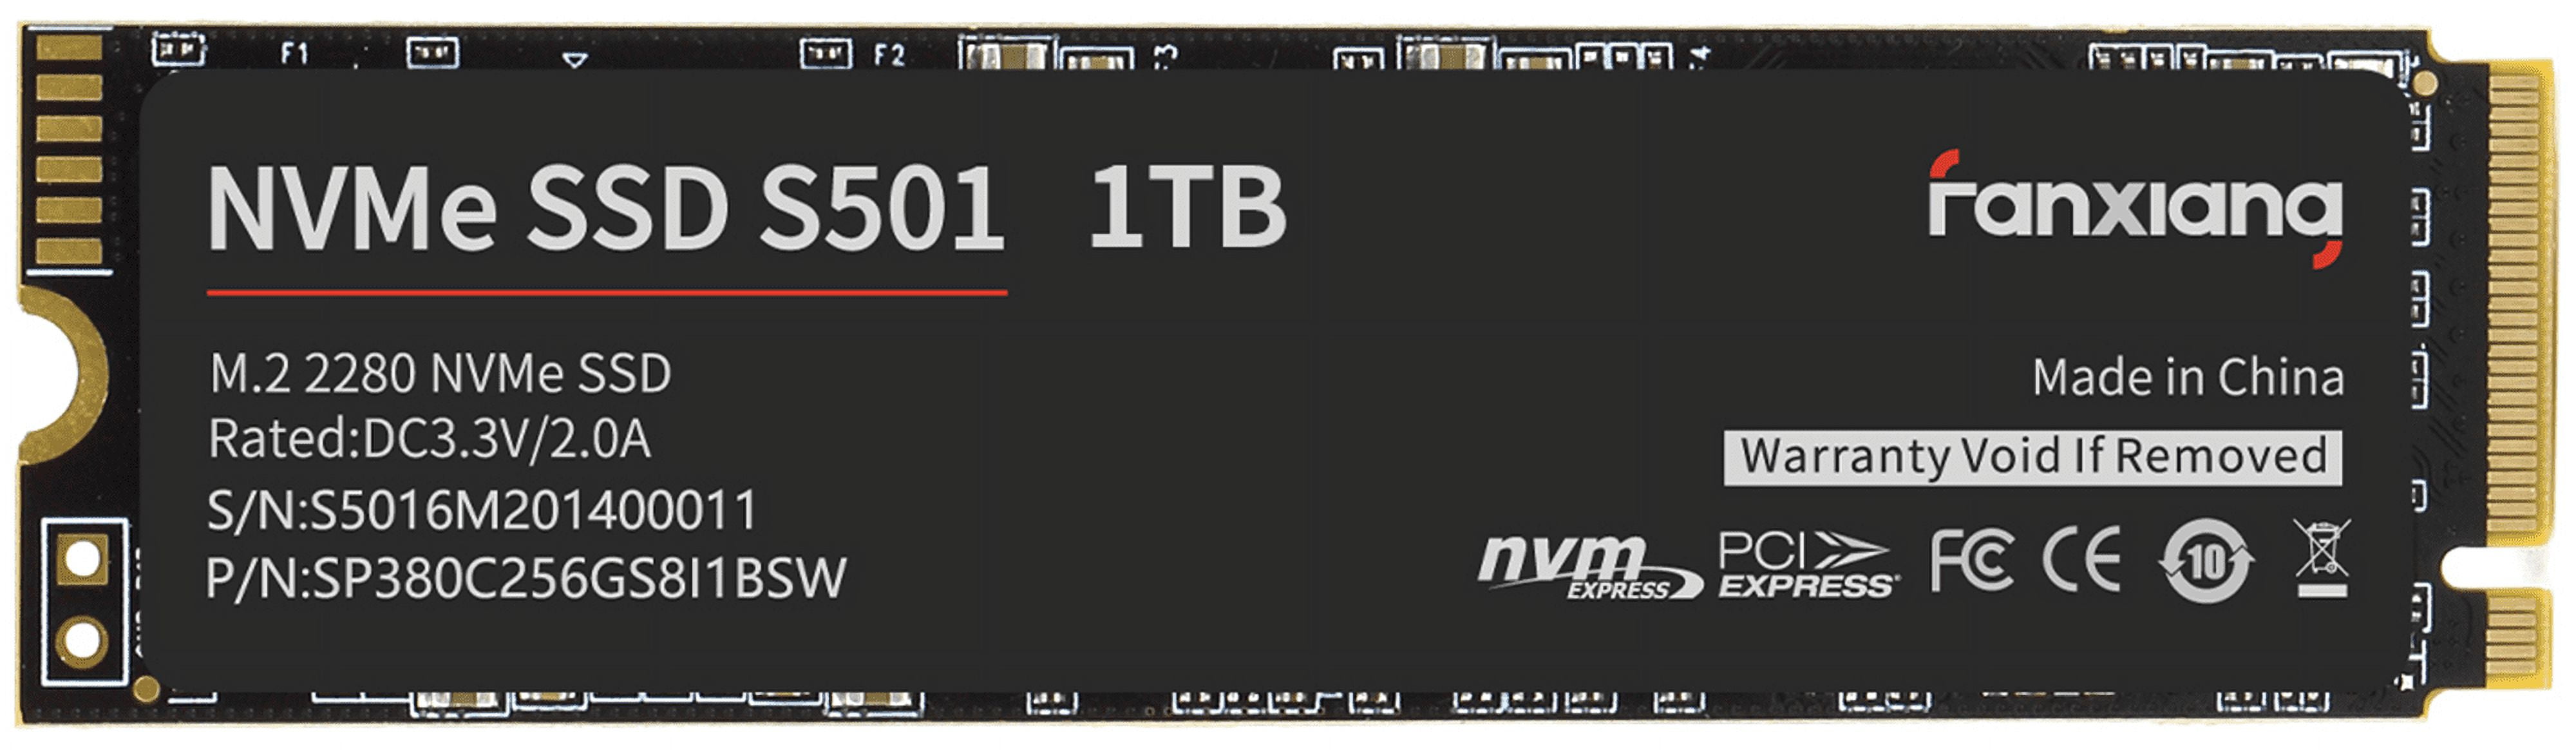 WD_BLACK 1TB SN850X NVMe SSD, Internal Gaming Solid State Drive -  WDS100T2X0E 